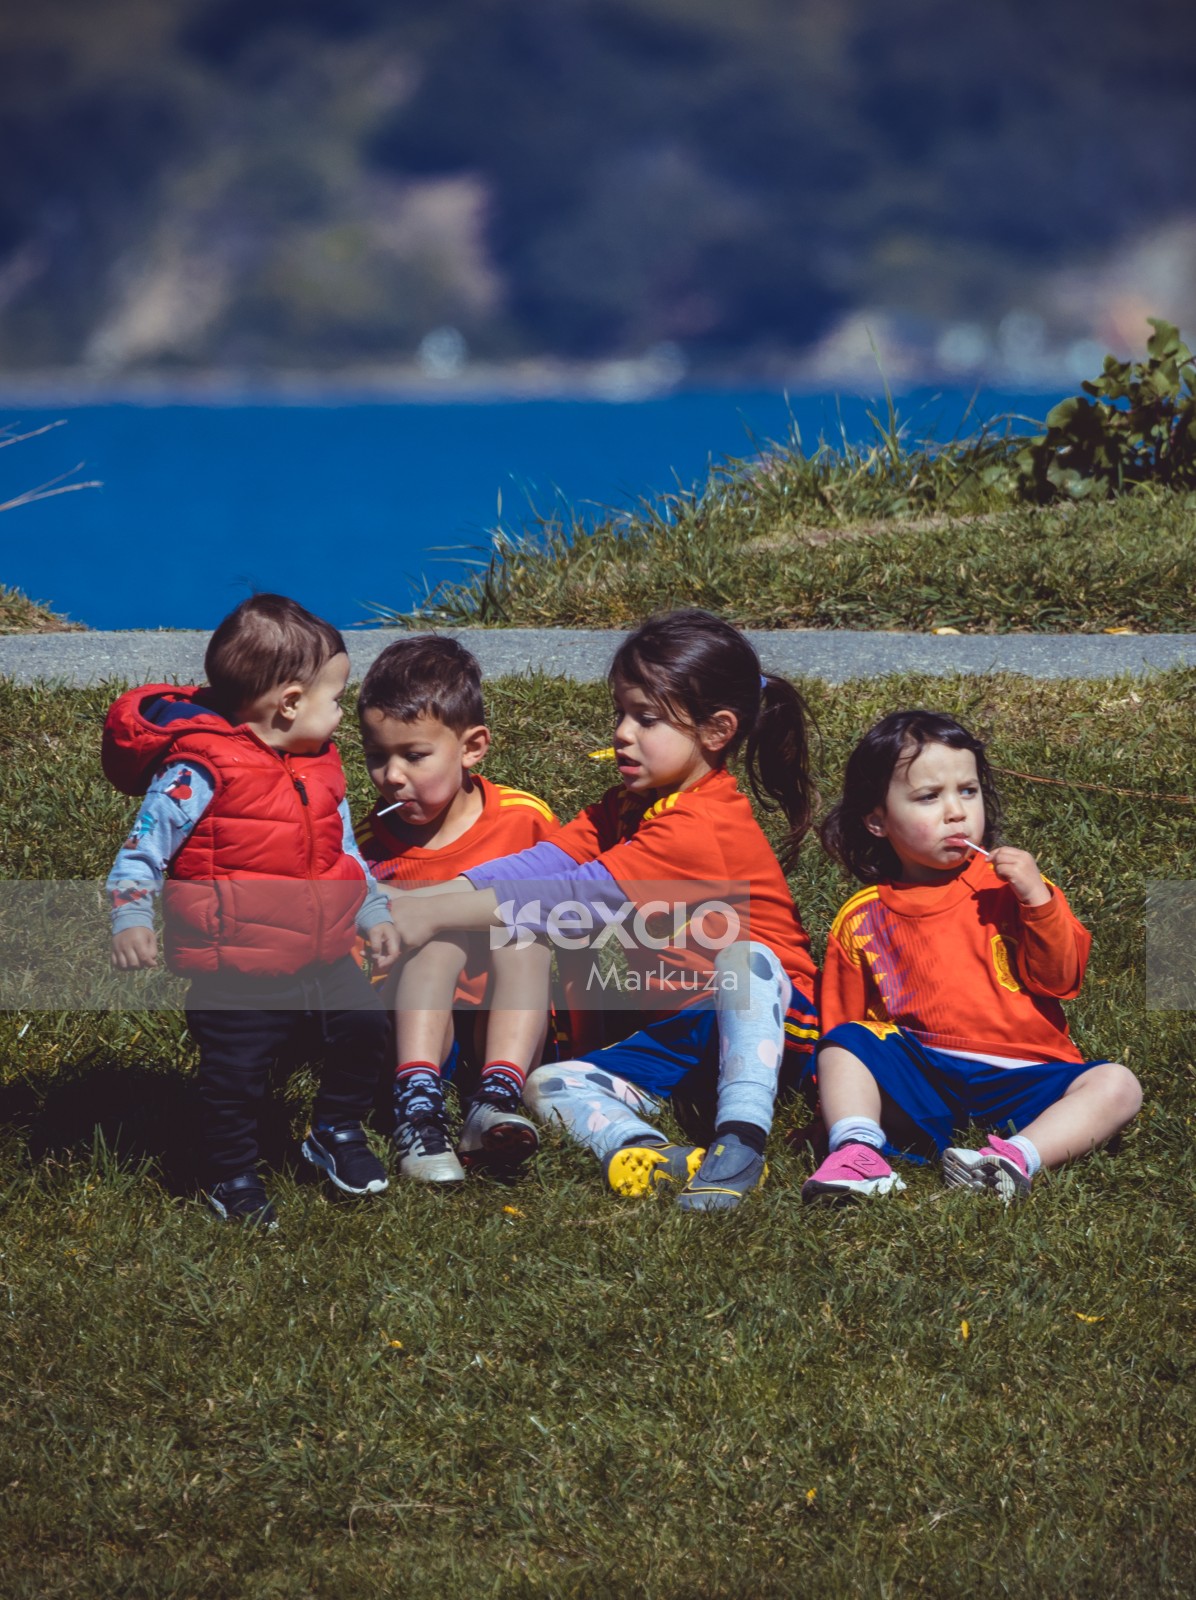 Four little kids sitting on the grass eating candy - Little Dribblers